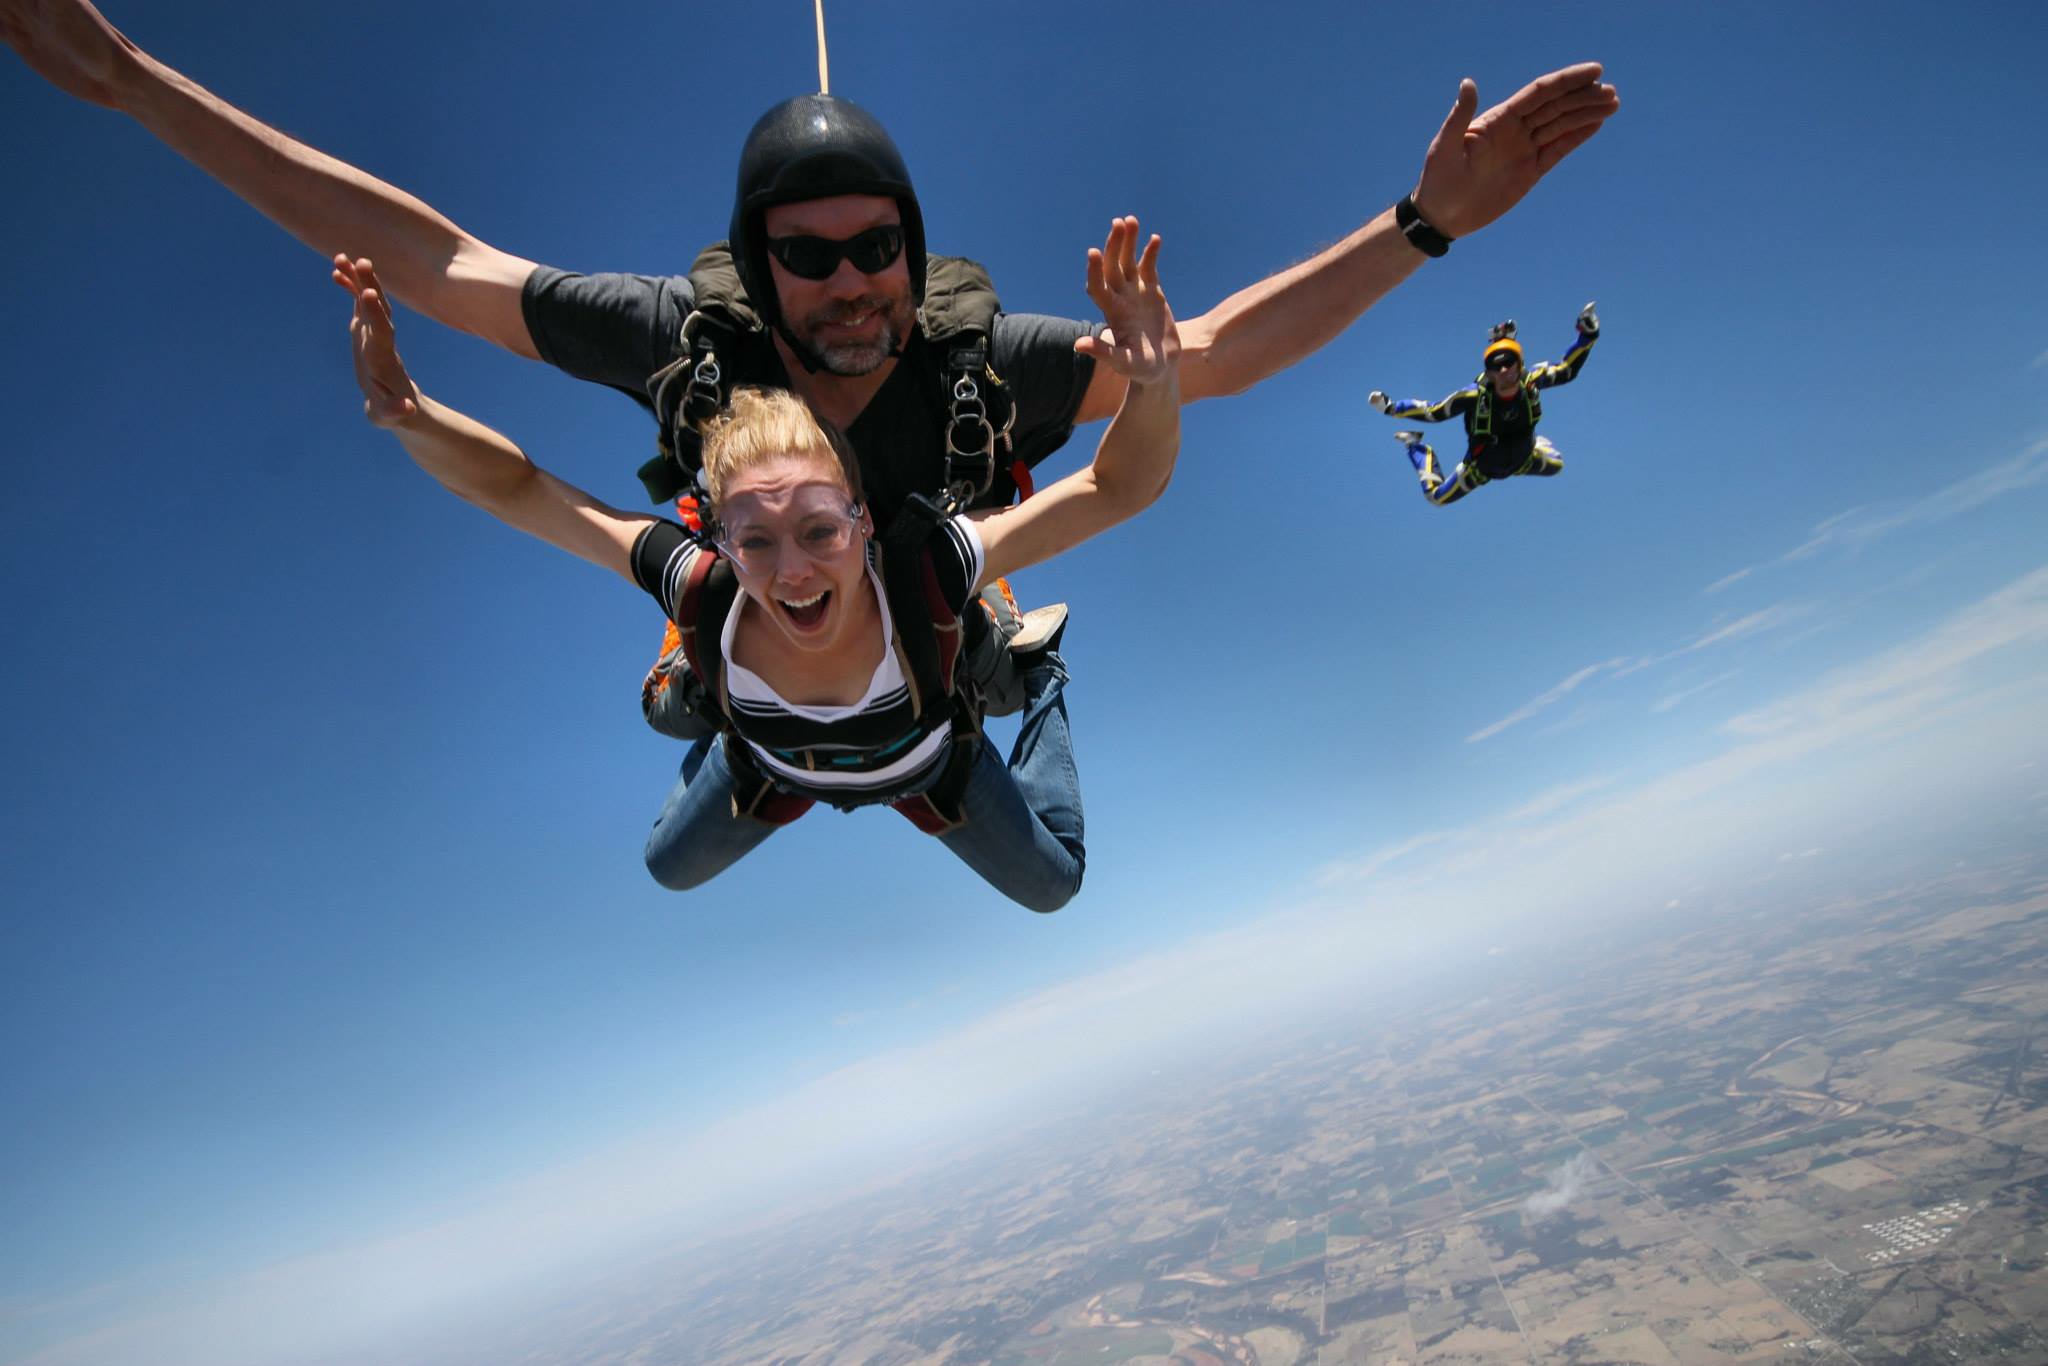 How High Do You Skydive From? Oklahoma Skydiving Center